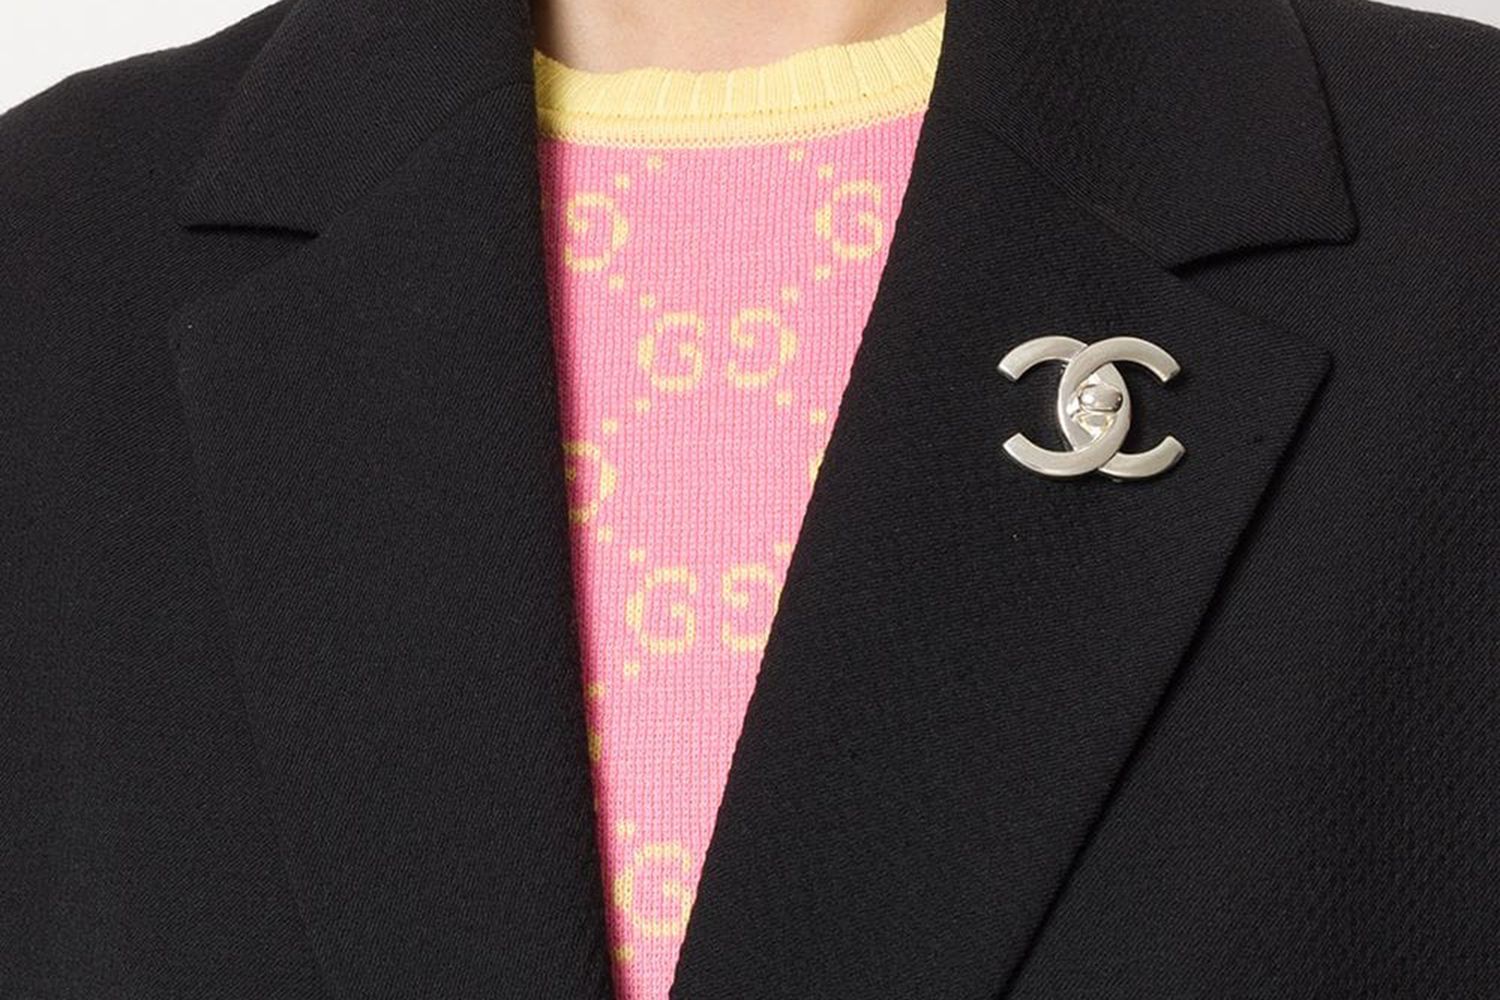 Chanel Accessories Every Man in Their Wardrobe